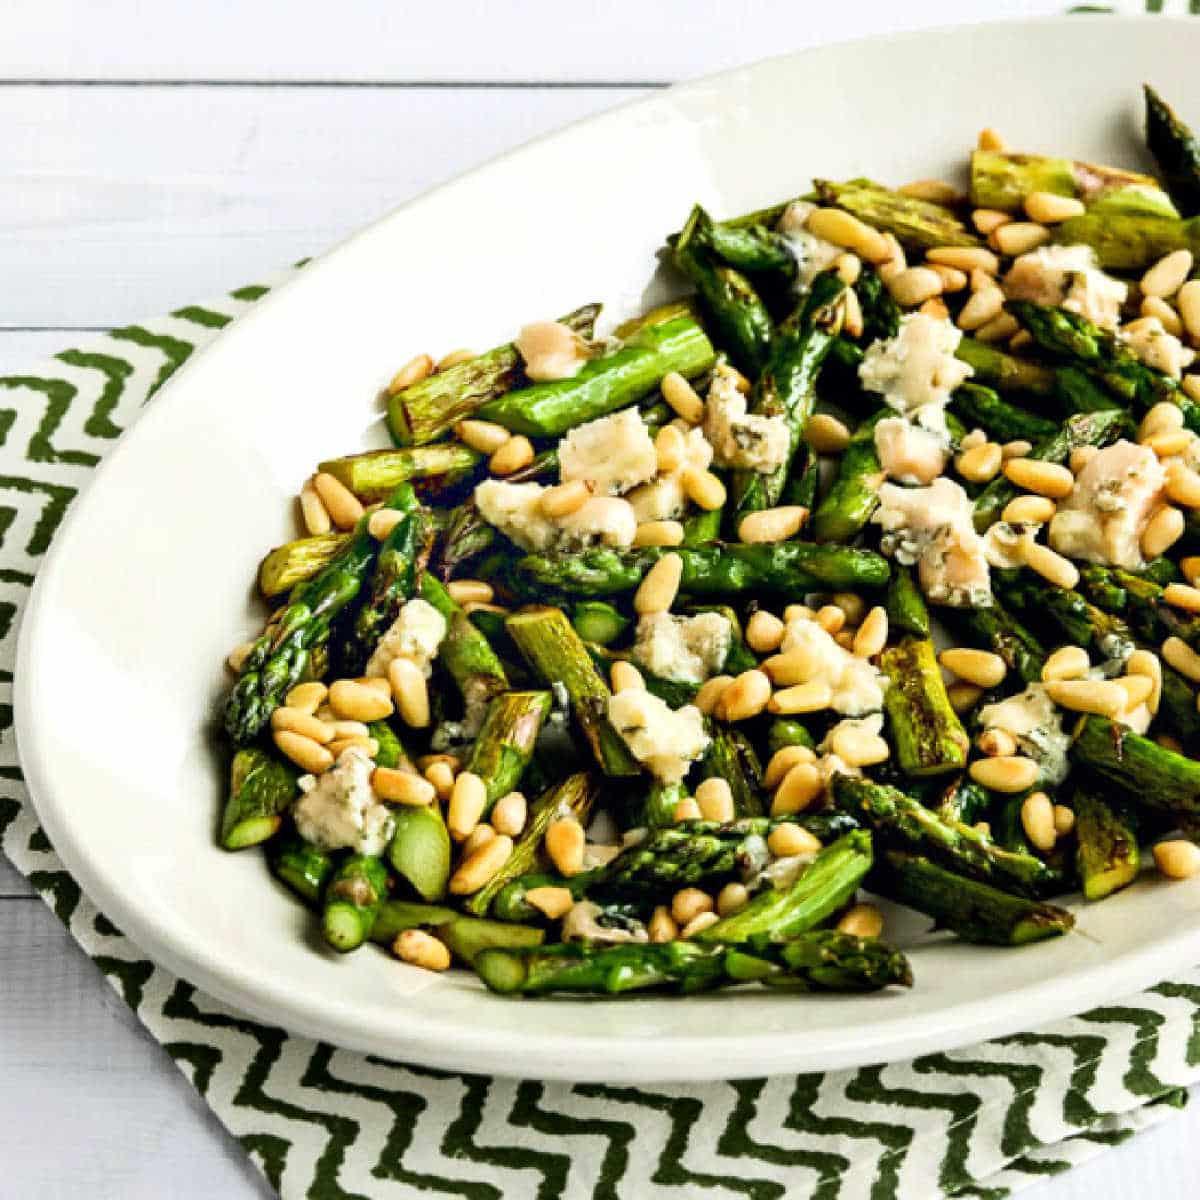 Square image of Pan-Fried Asparagus with Gorgonzola and Pine Nuts on serving plate